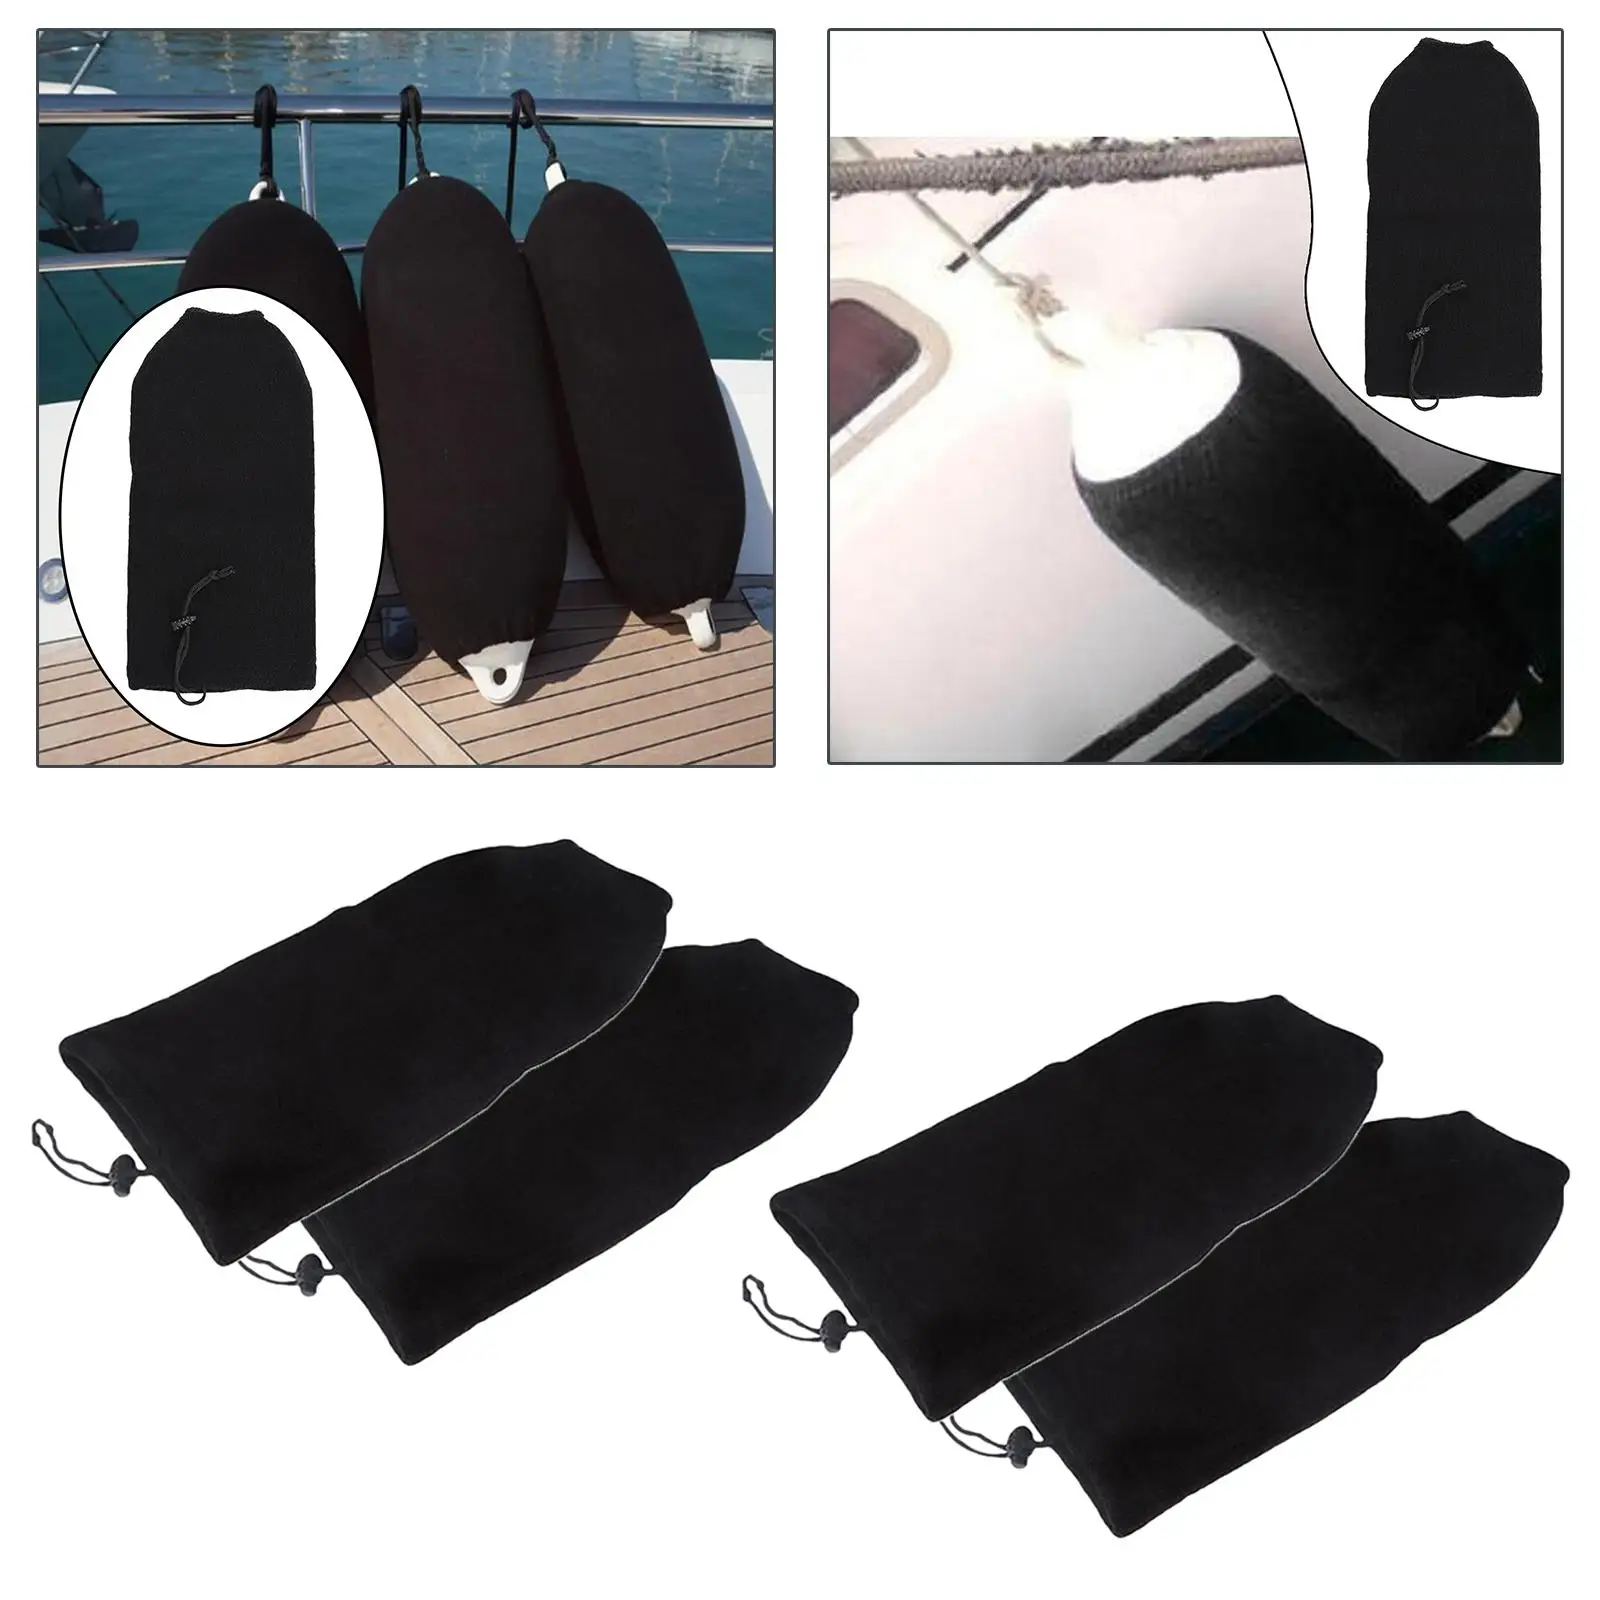 4x Boat Mudguard Cover, Soft Acrylic Woven Cover Protection for Marine Bumper